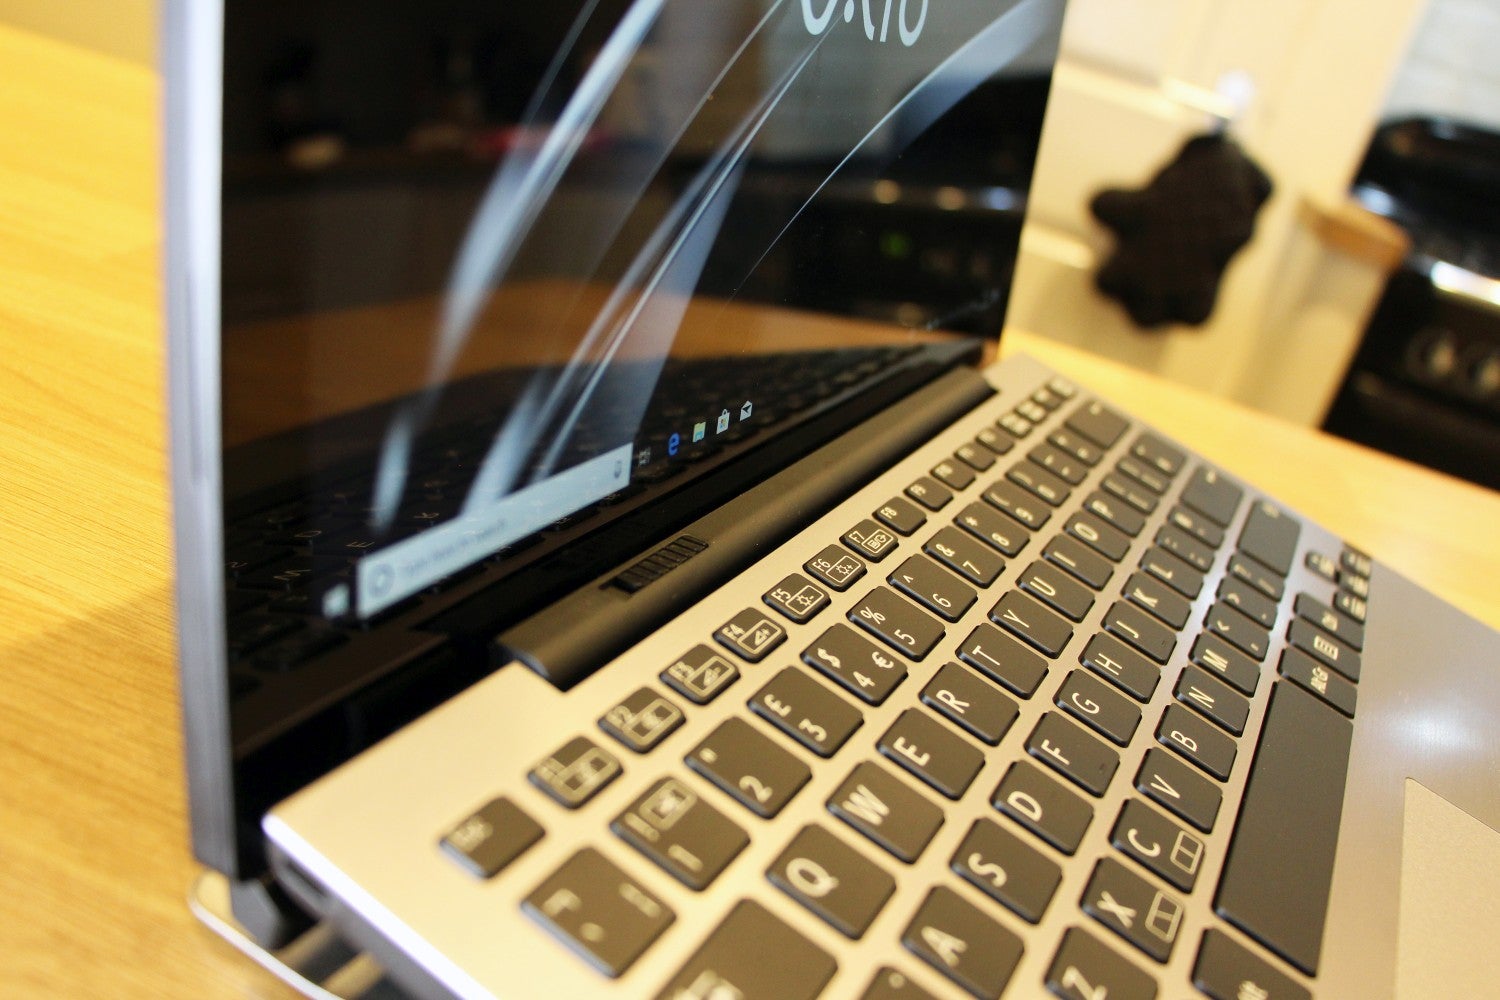 VAIO A12 Review | Trusted Reviews